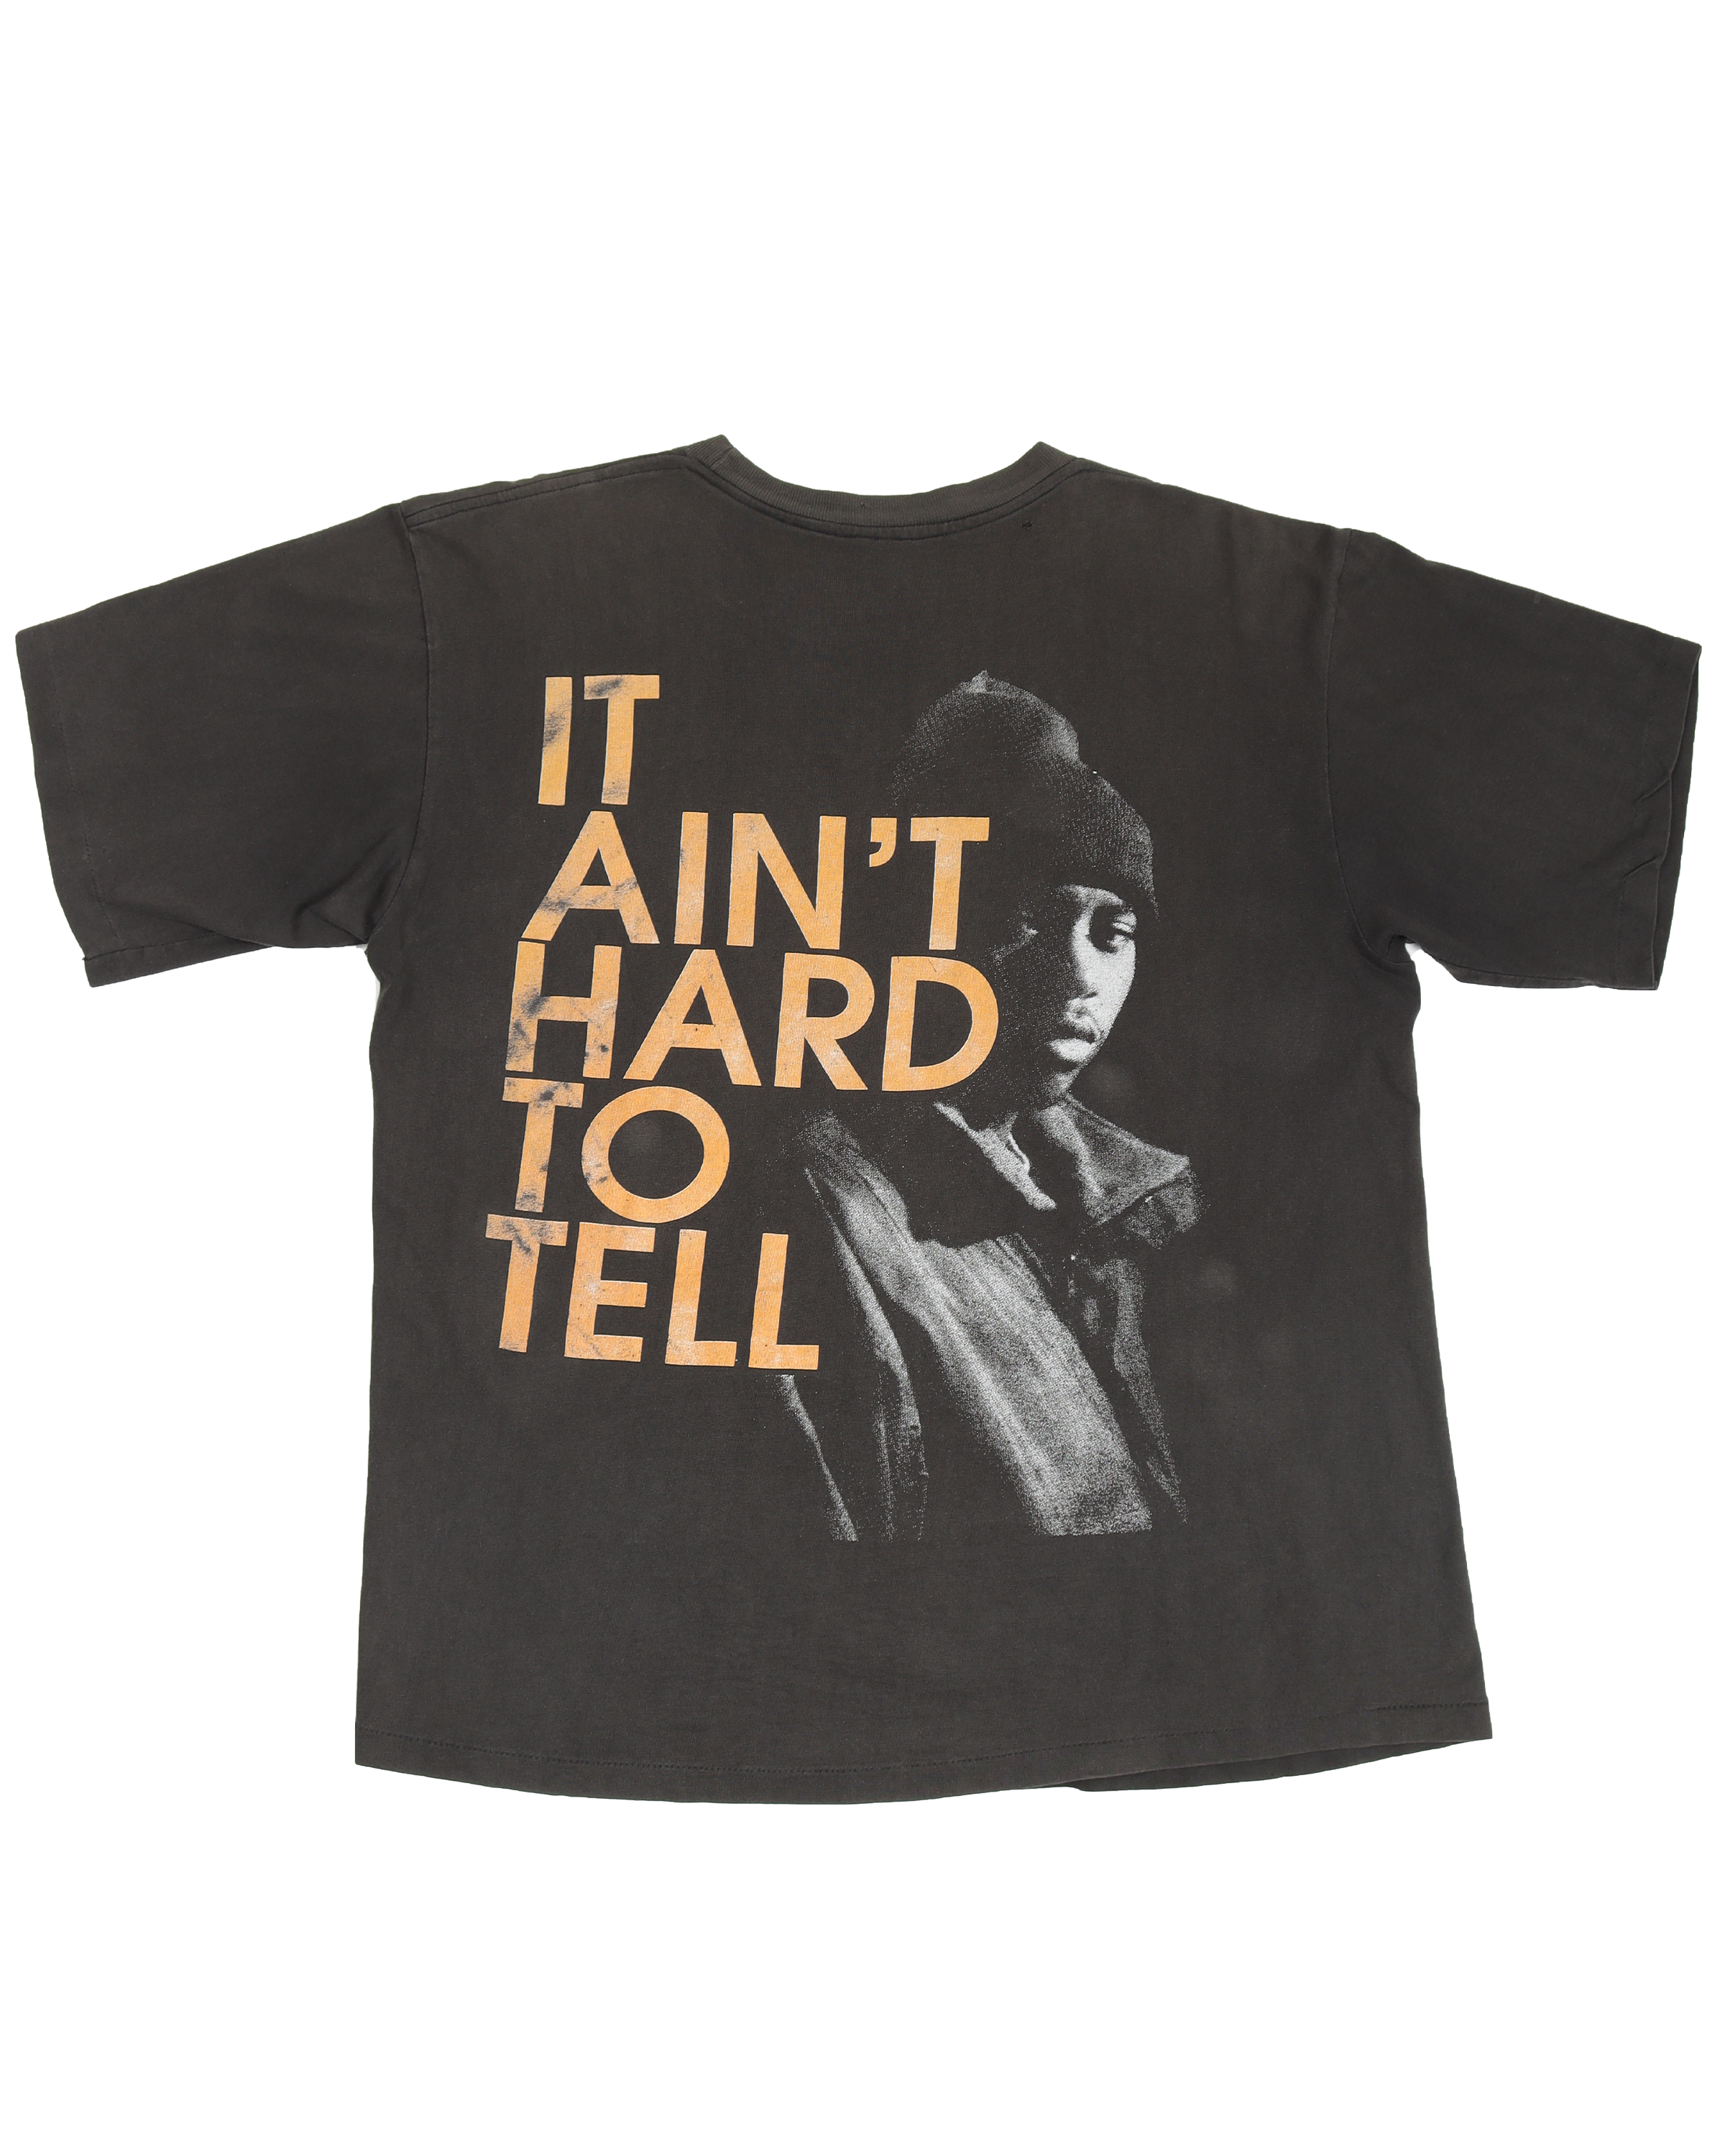 NAS 'It Ain't Hard to Tell' Graphic T-Shirt